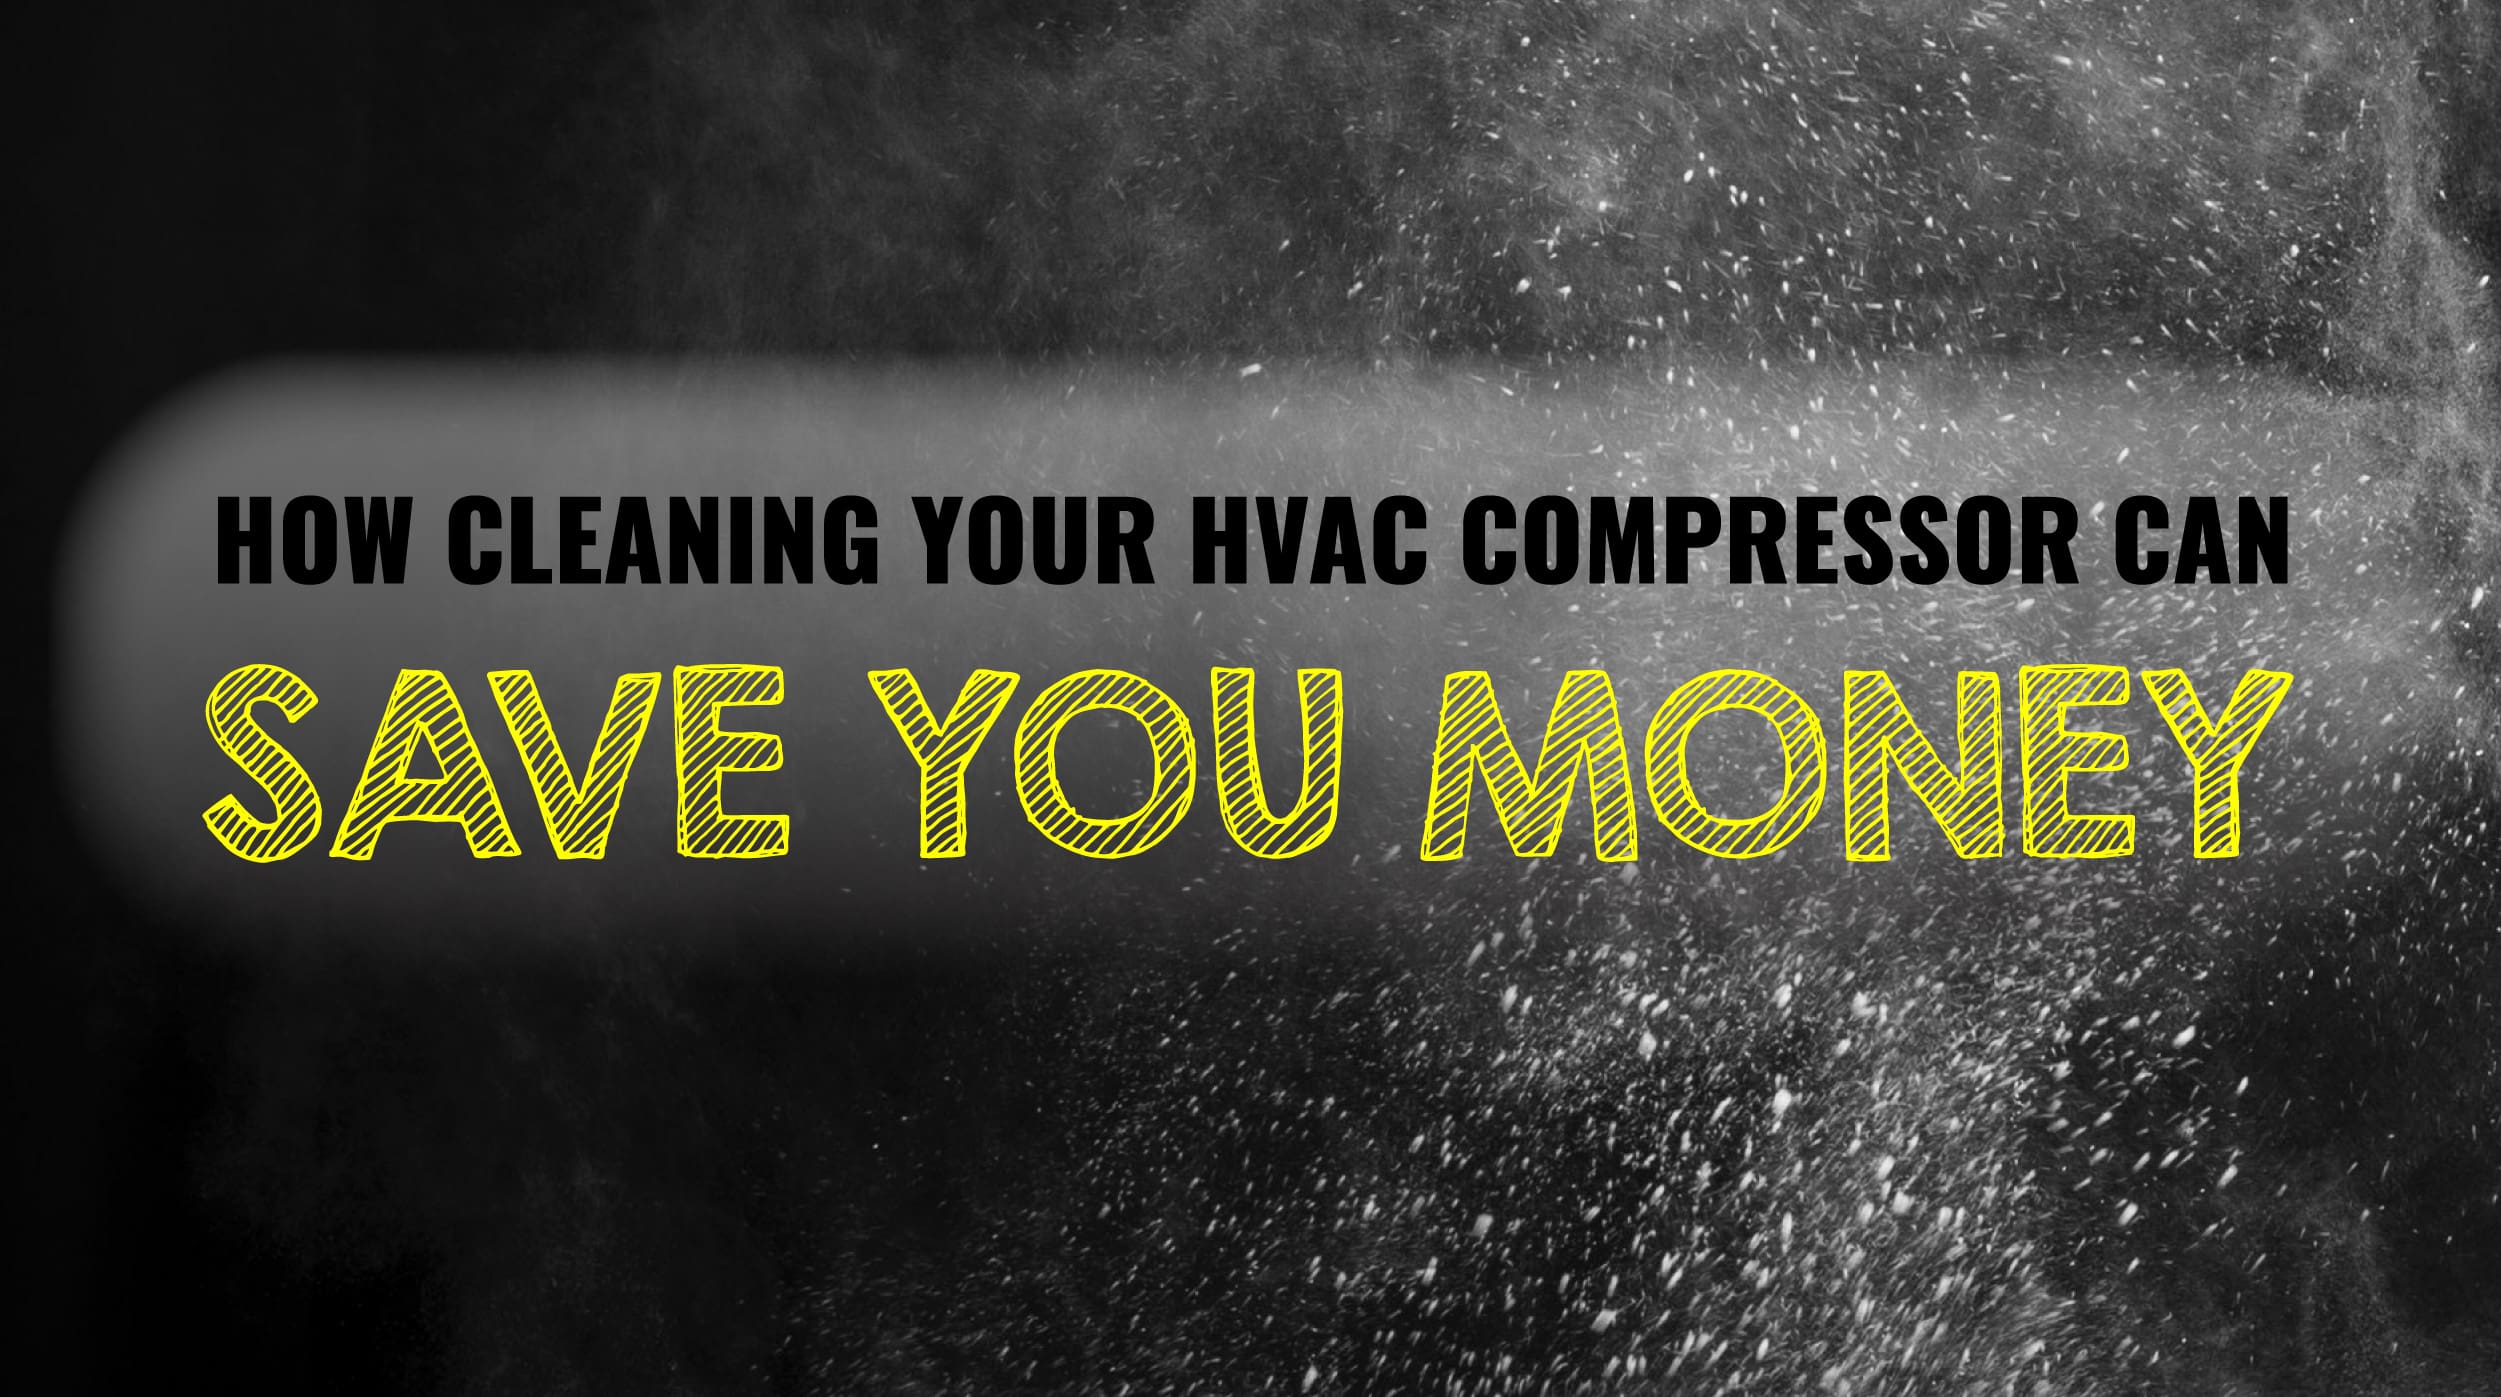 Cleaning Your HVAC Compressor Can Save You Money